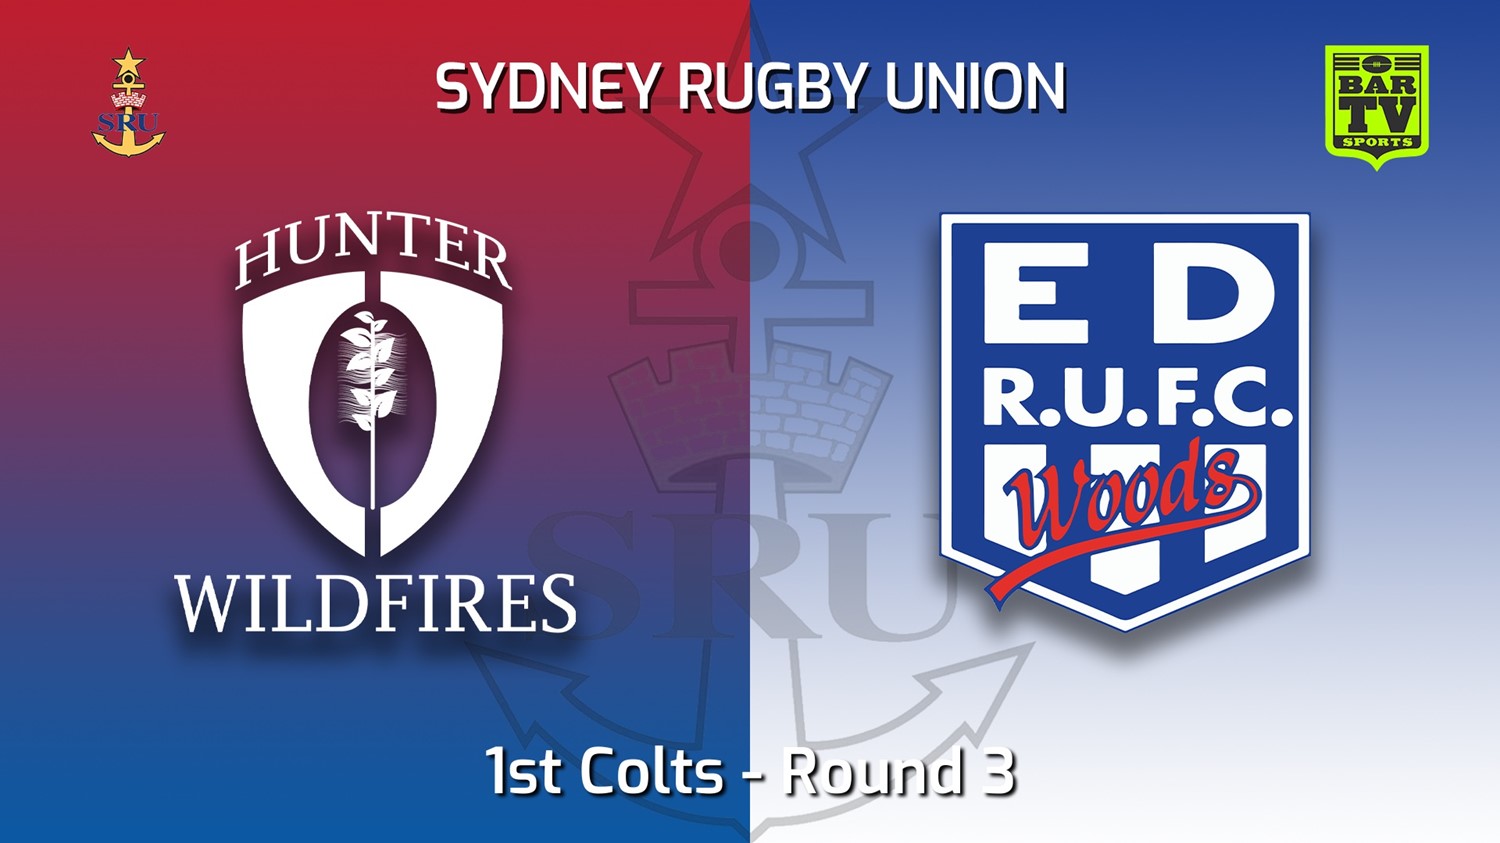 220416-Sydney Rugby Union Round 3 - 1st Colts - Hunter Wildfires v Eastwood Slate Image